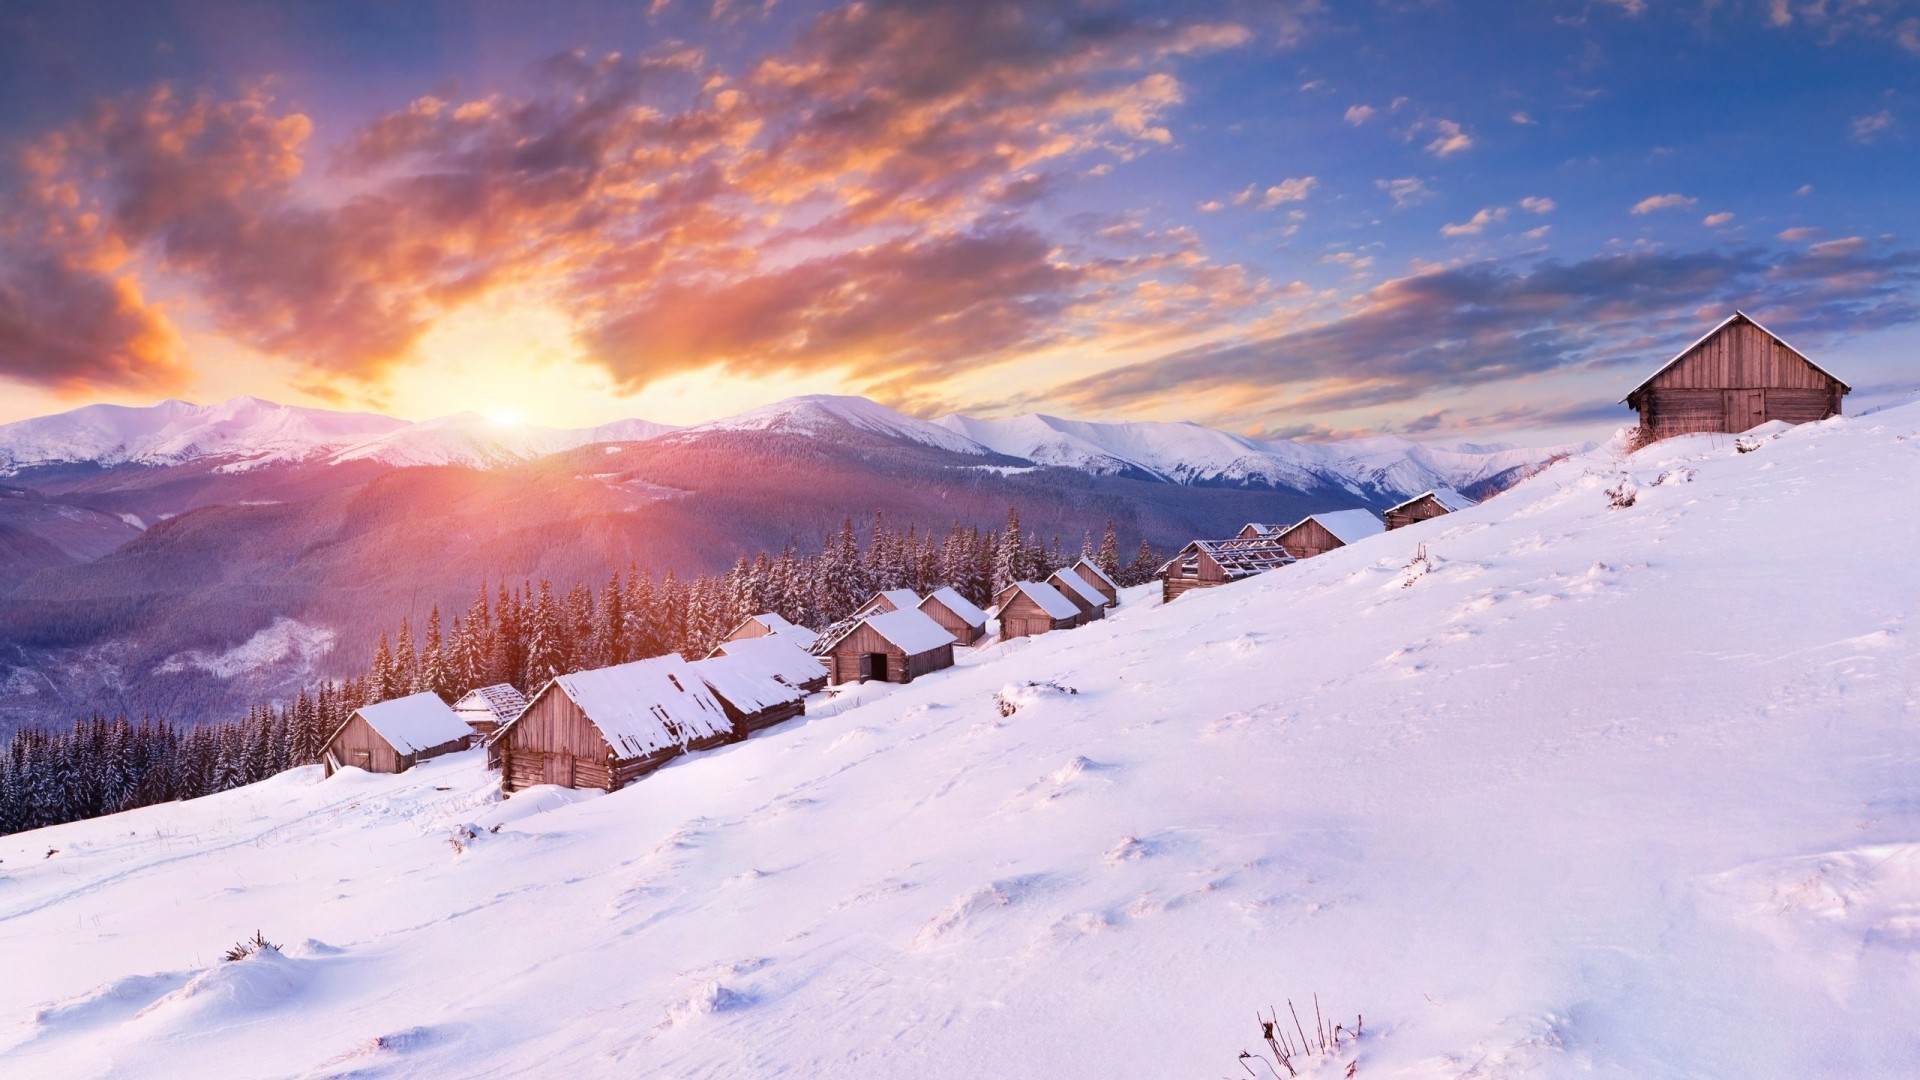 General 1920x1080 snow winter sunset mountain chain cabin nature landscape sunlight cold ice hut